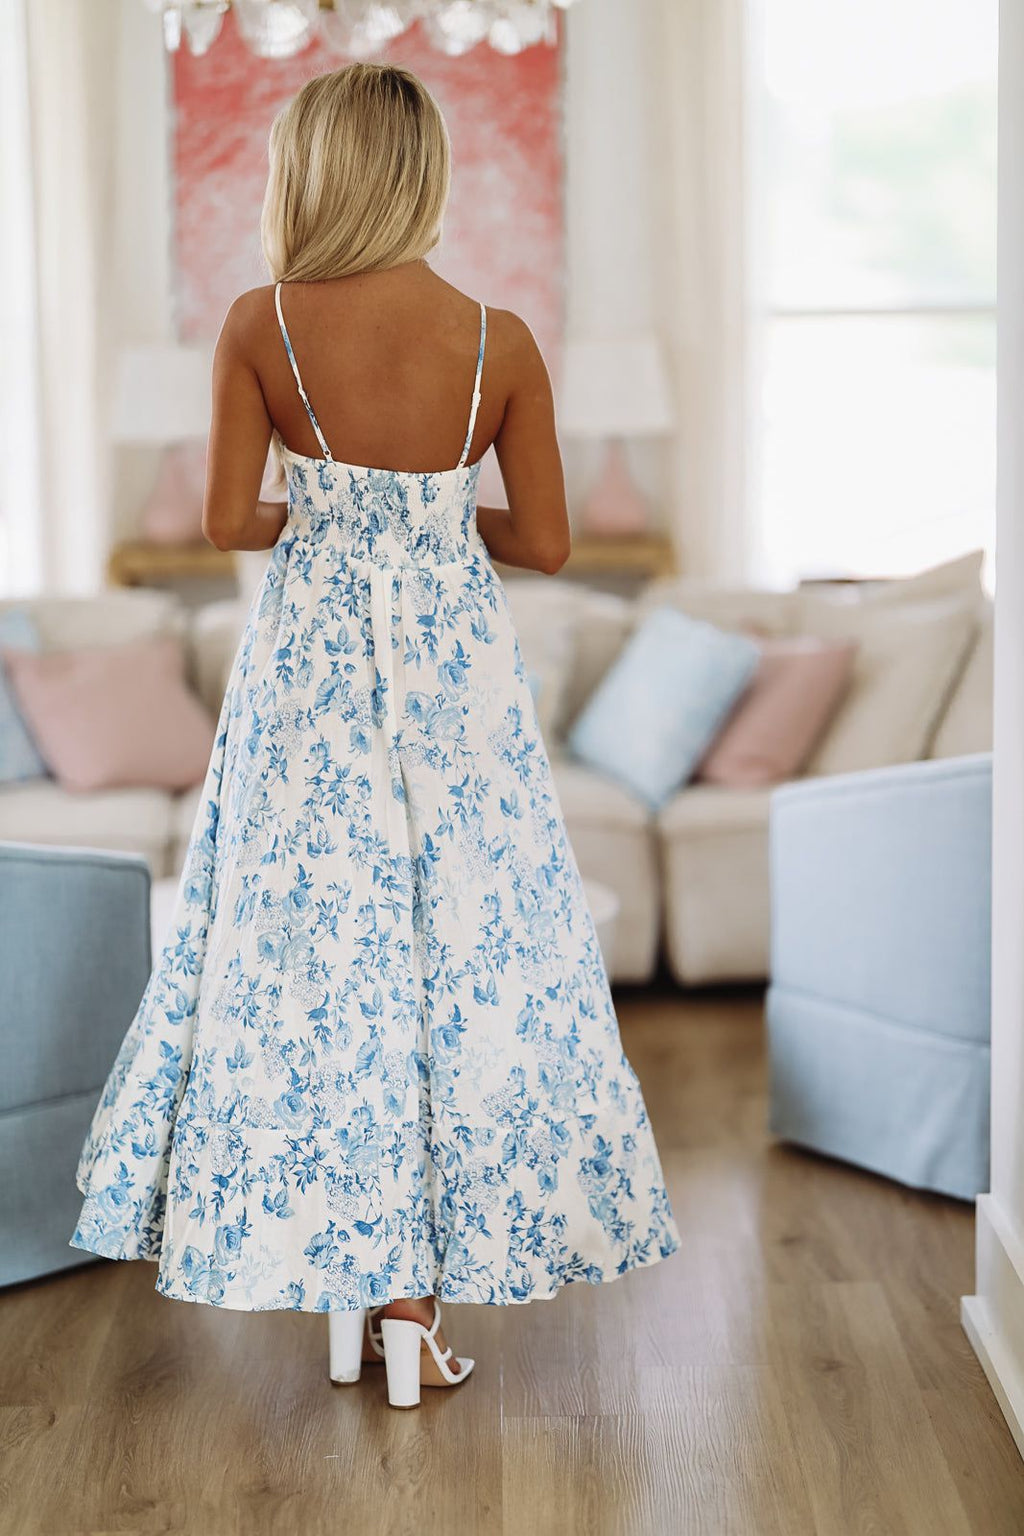 HAZEL & OLIVE In a Dream Maxi Dress - White and Blue